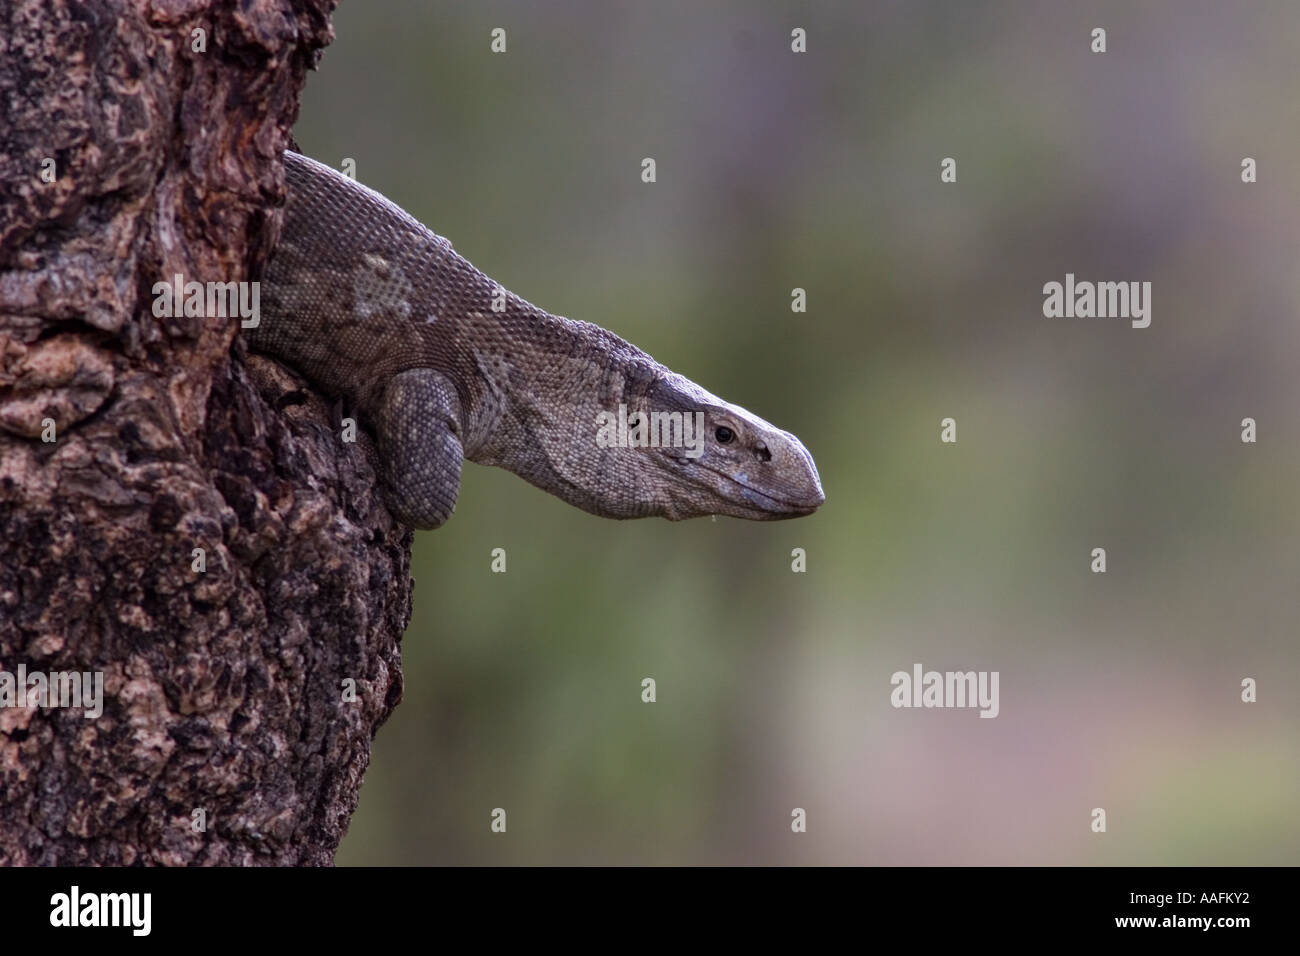 Rock monitor peeping out of tree Stock Photo